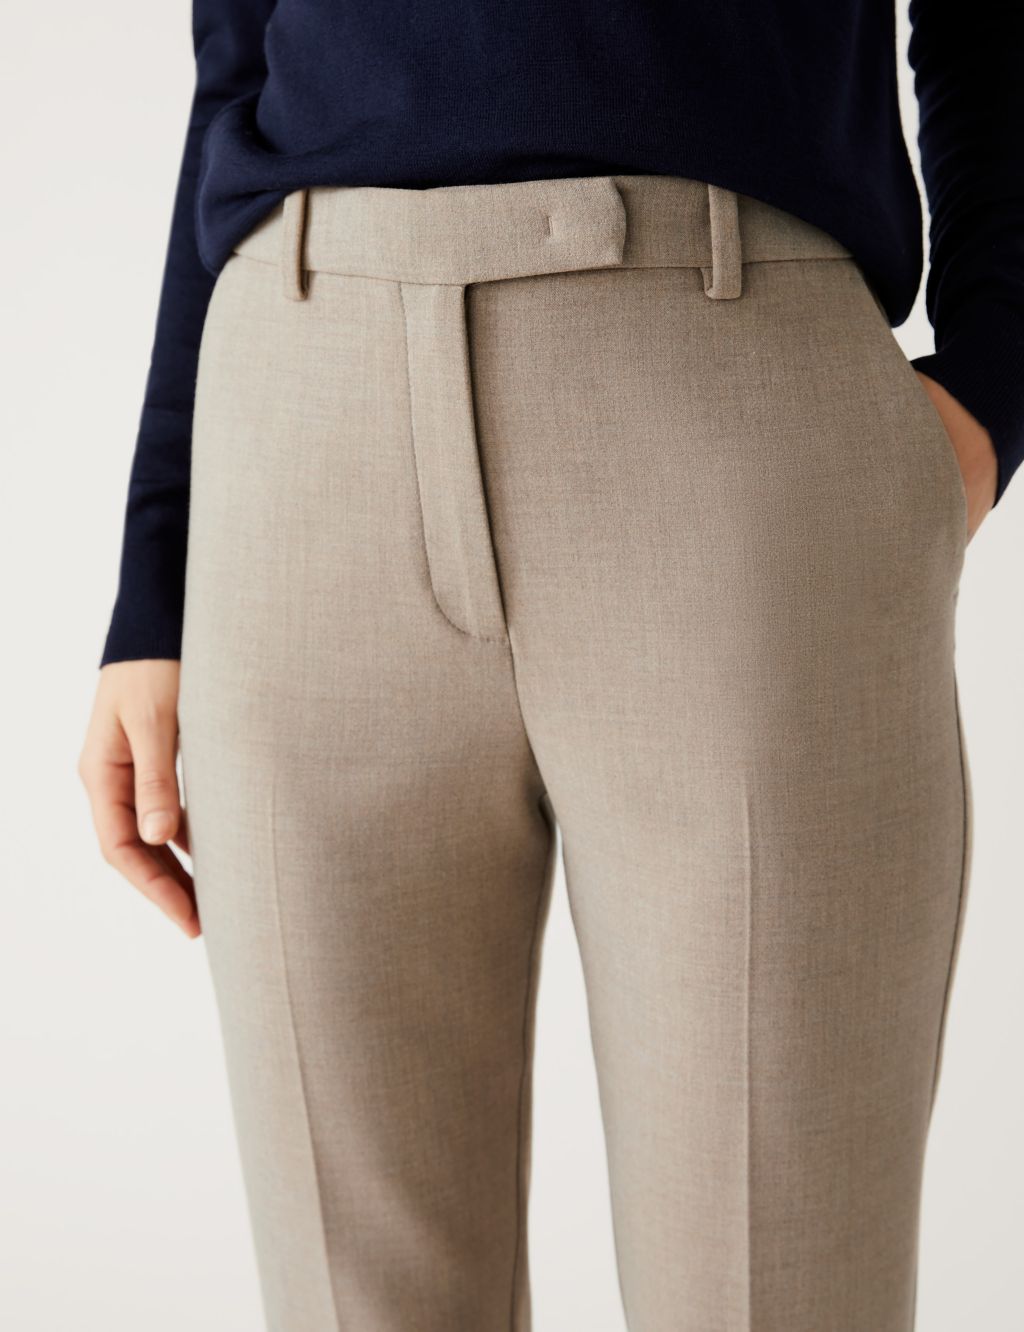 Marl Slim Fit Ankle Grazer Trousers image 3